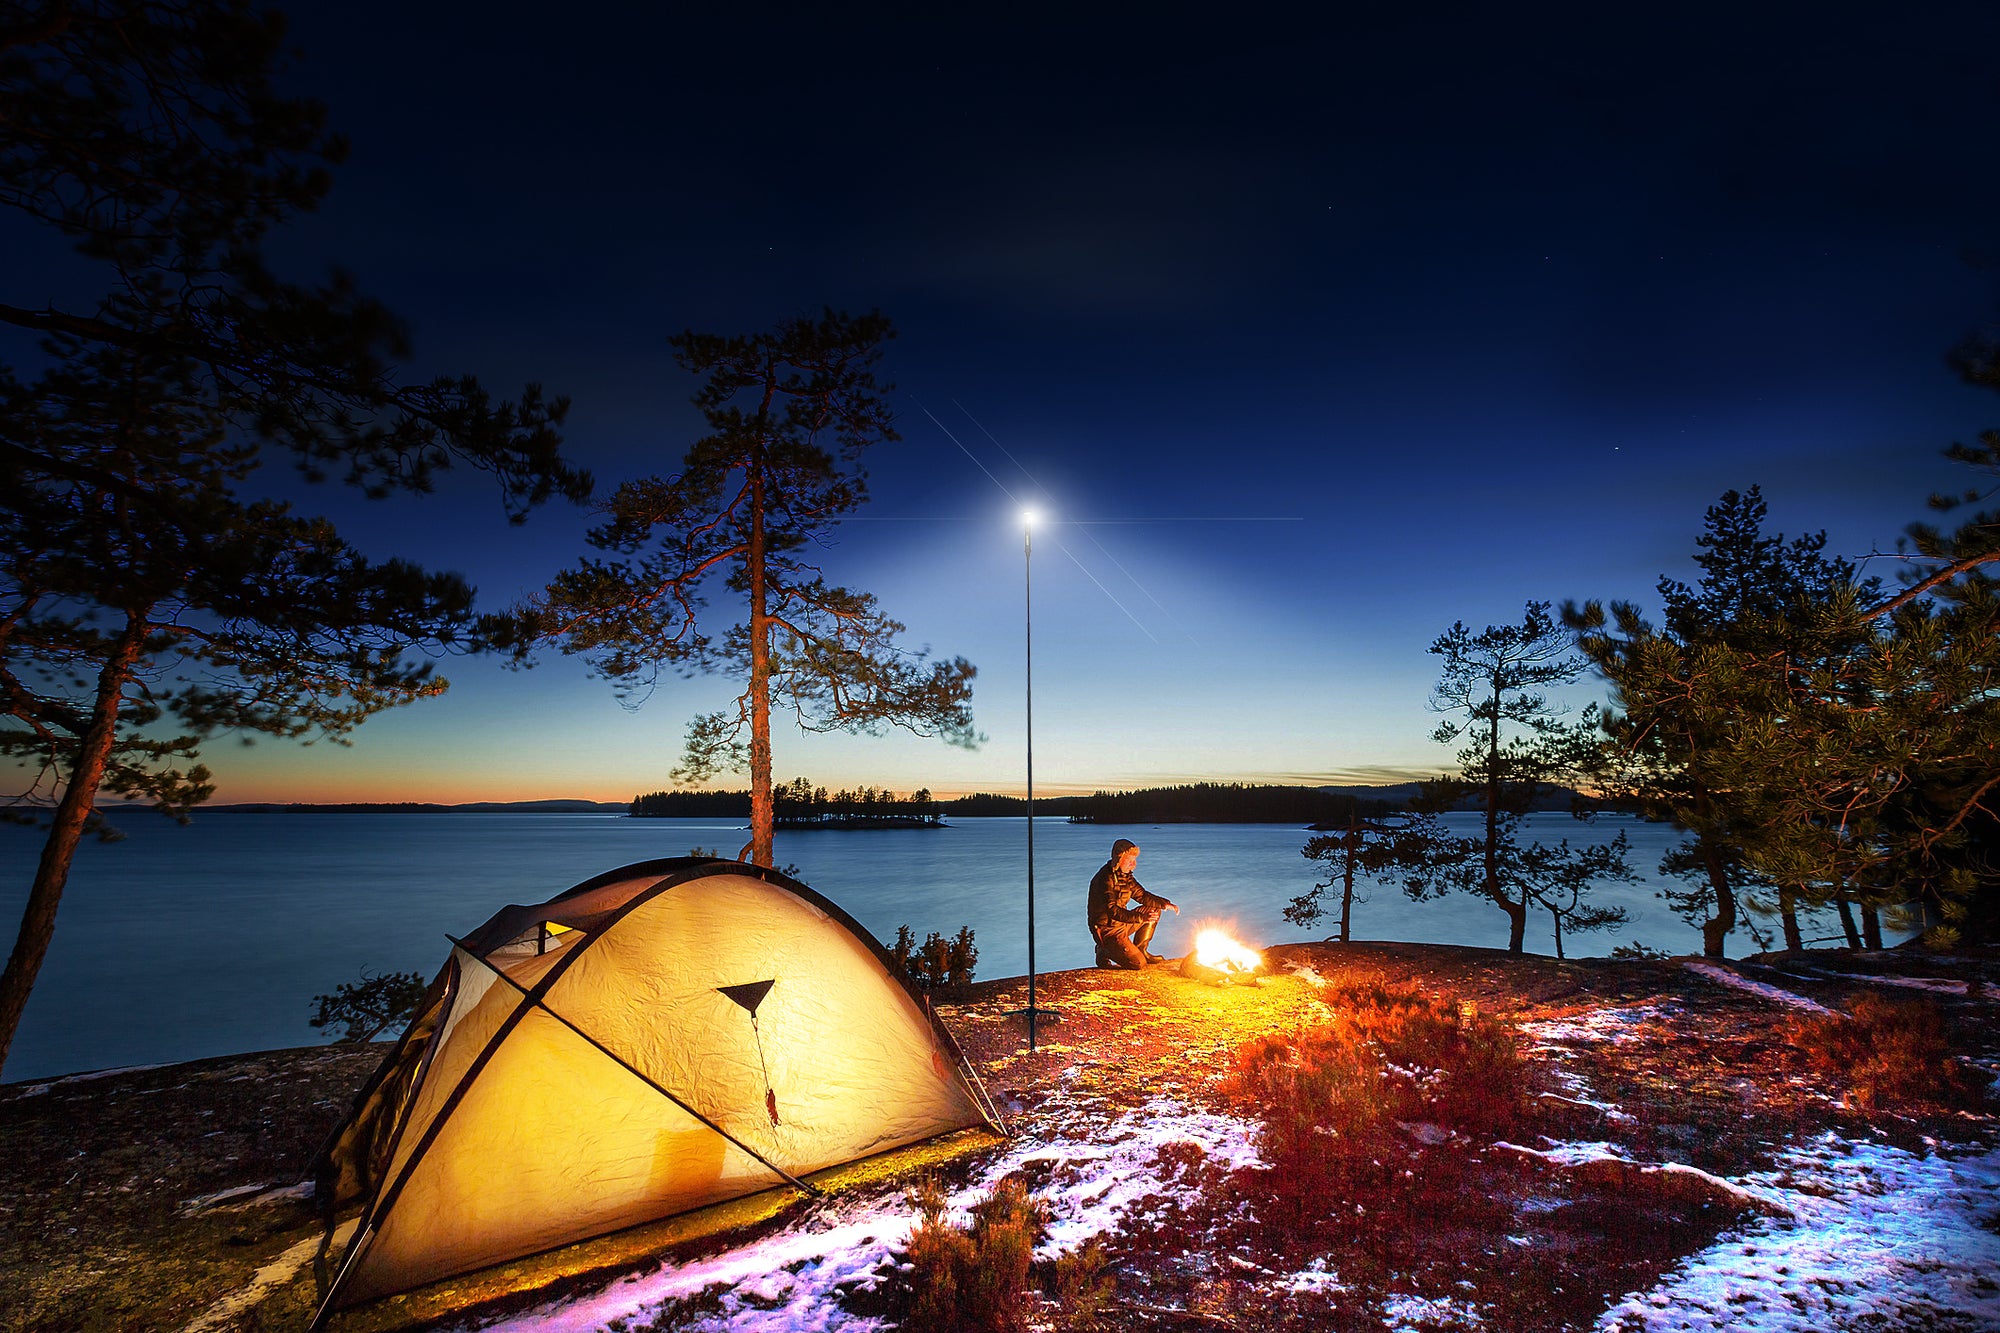 Lakeside camping scene featuring a FLi-PRO telescoping area light illuminating a campsite. male figure kneeling by a fire near a tent and some trees